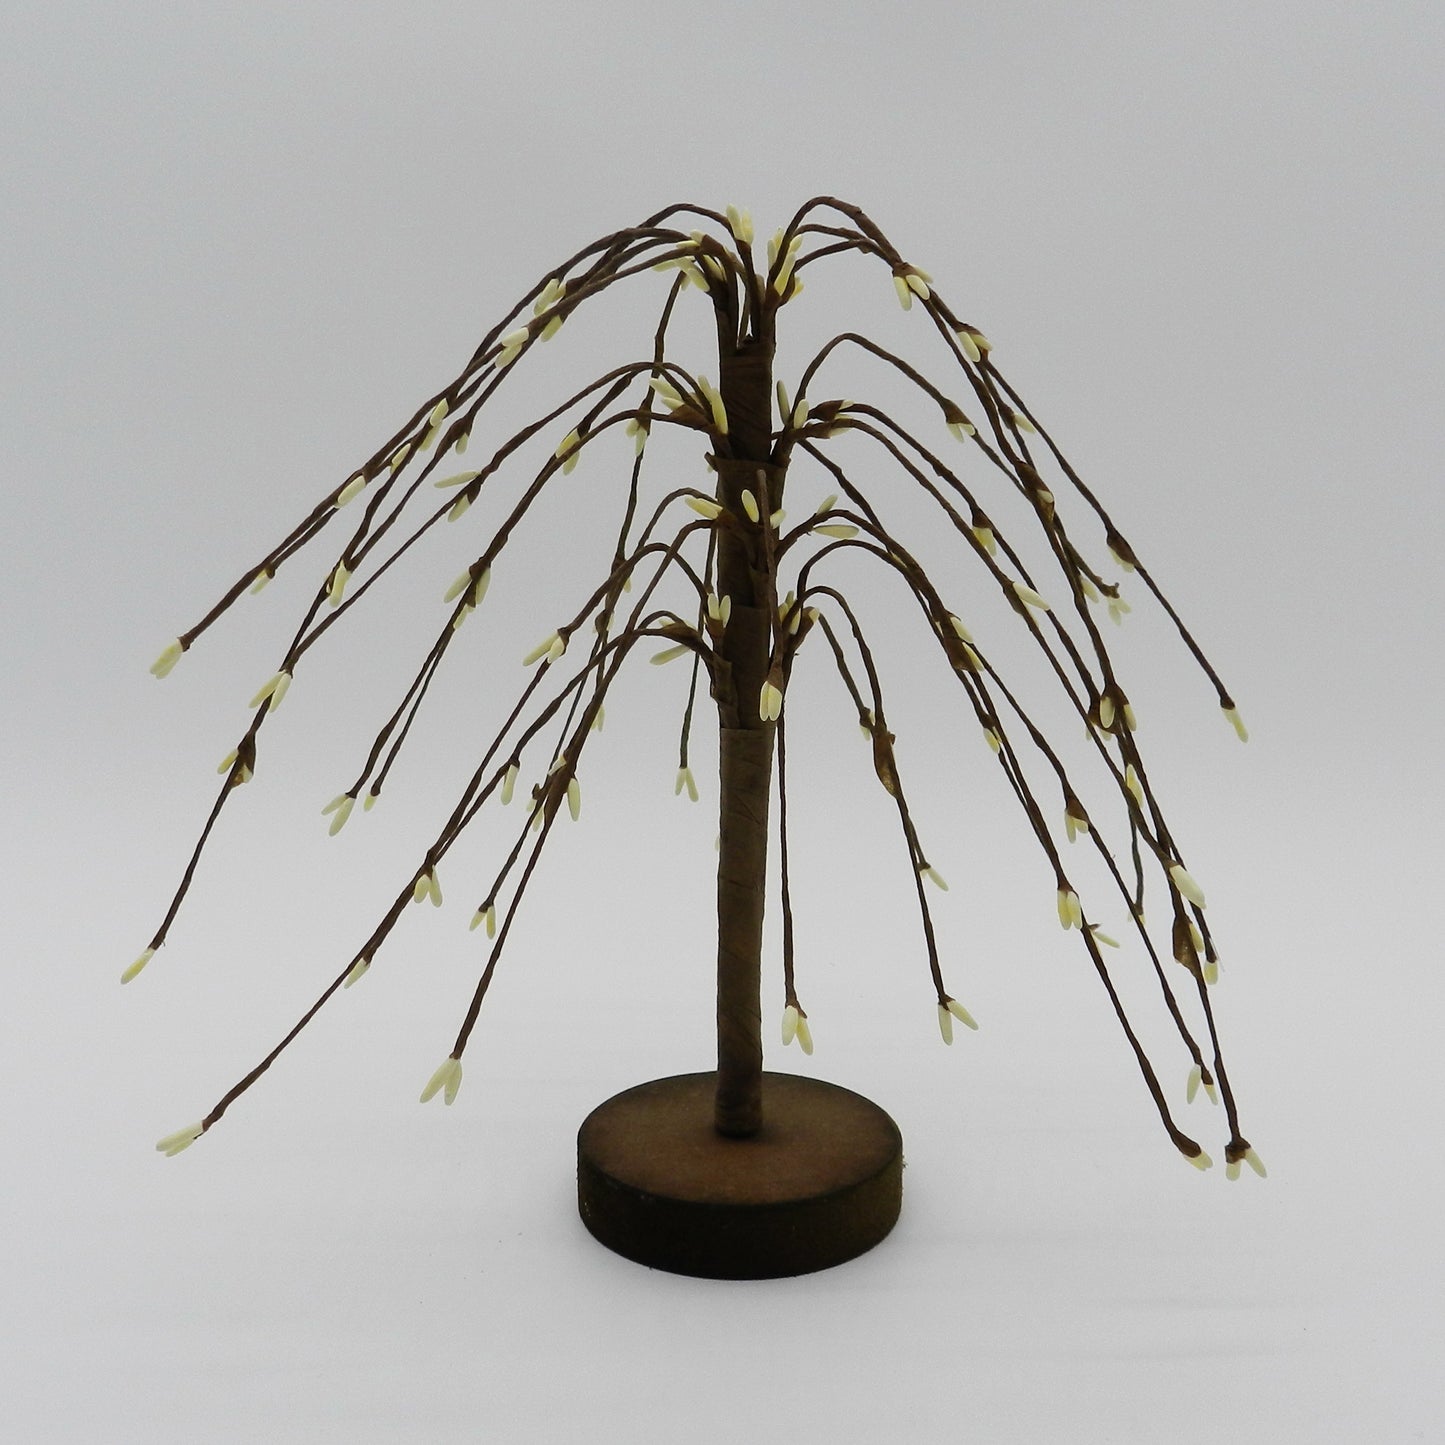 CVHOMEDECO. Cream Pip Berry Weeping Willow Tree Rustic Vintage Decoration Art, 7 Inch